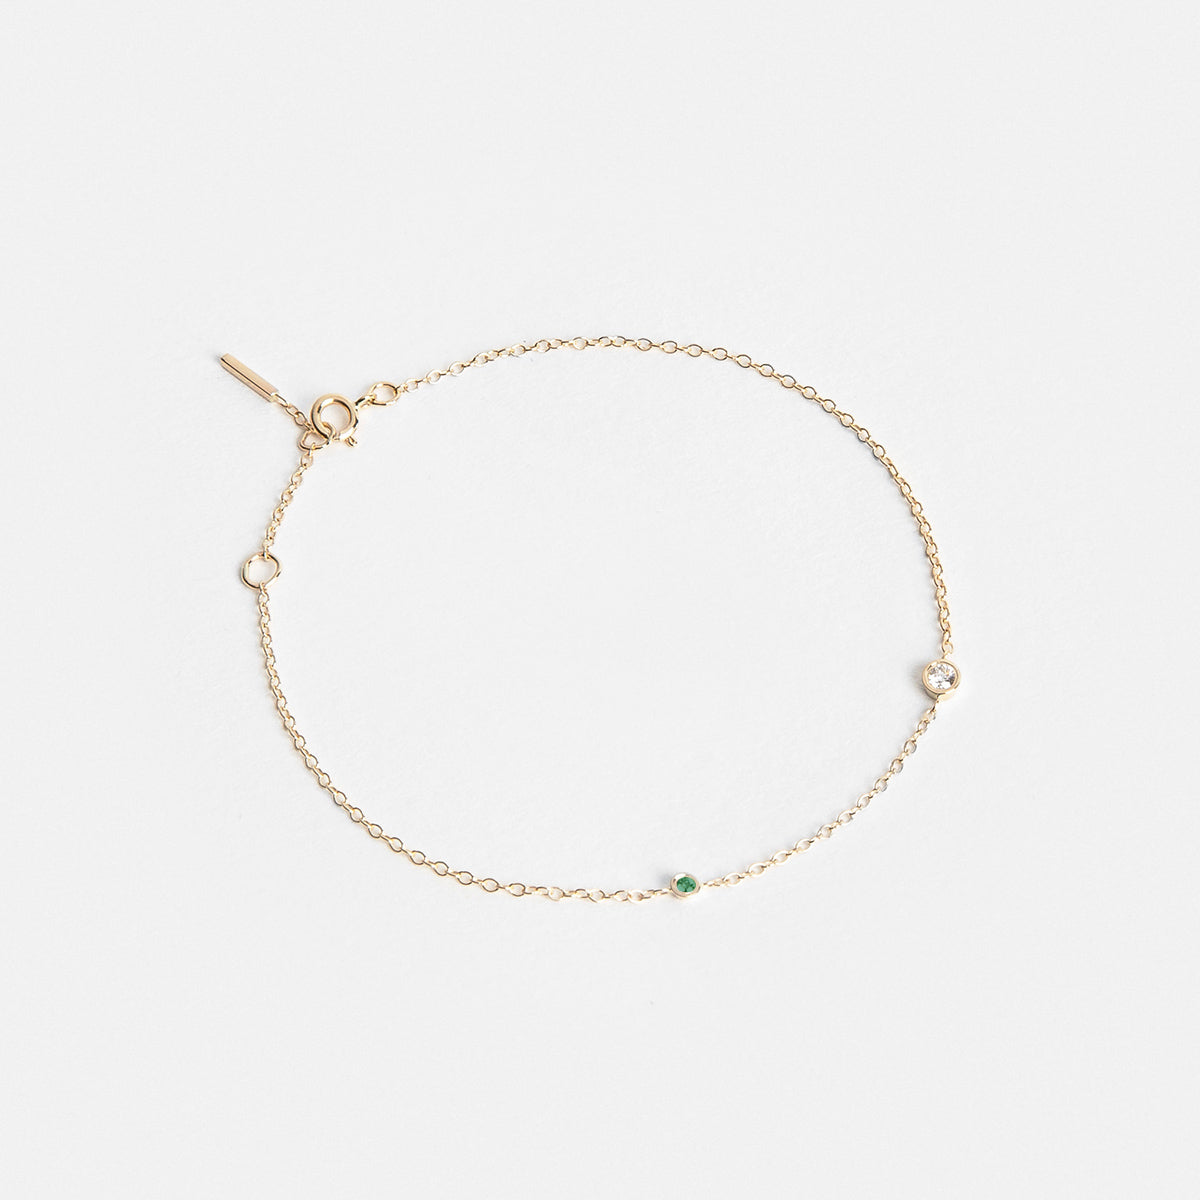 Iba Delicate Bracelet in 14k Gold set with Precious stones By SHW Fine Jewelry NYC